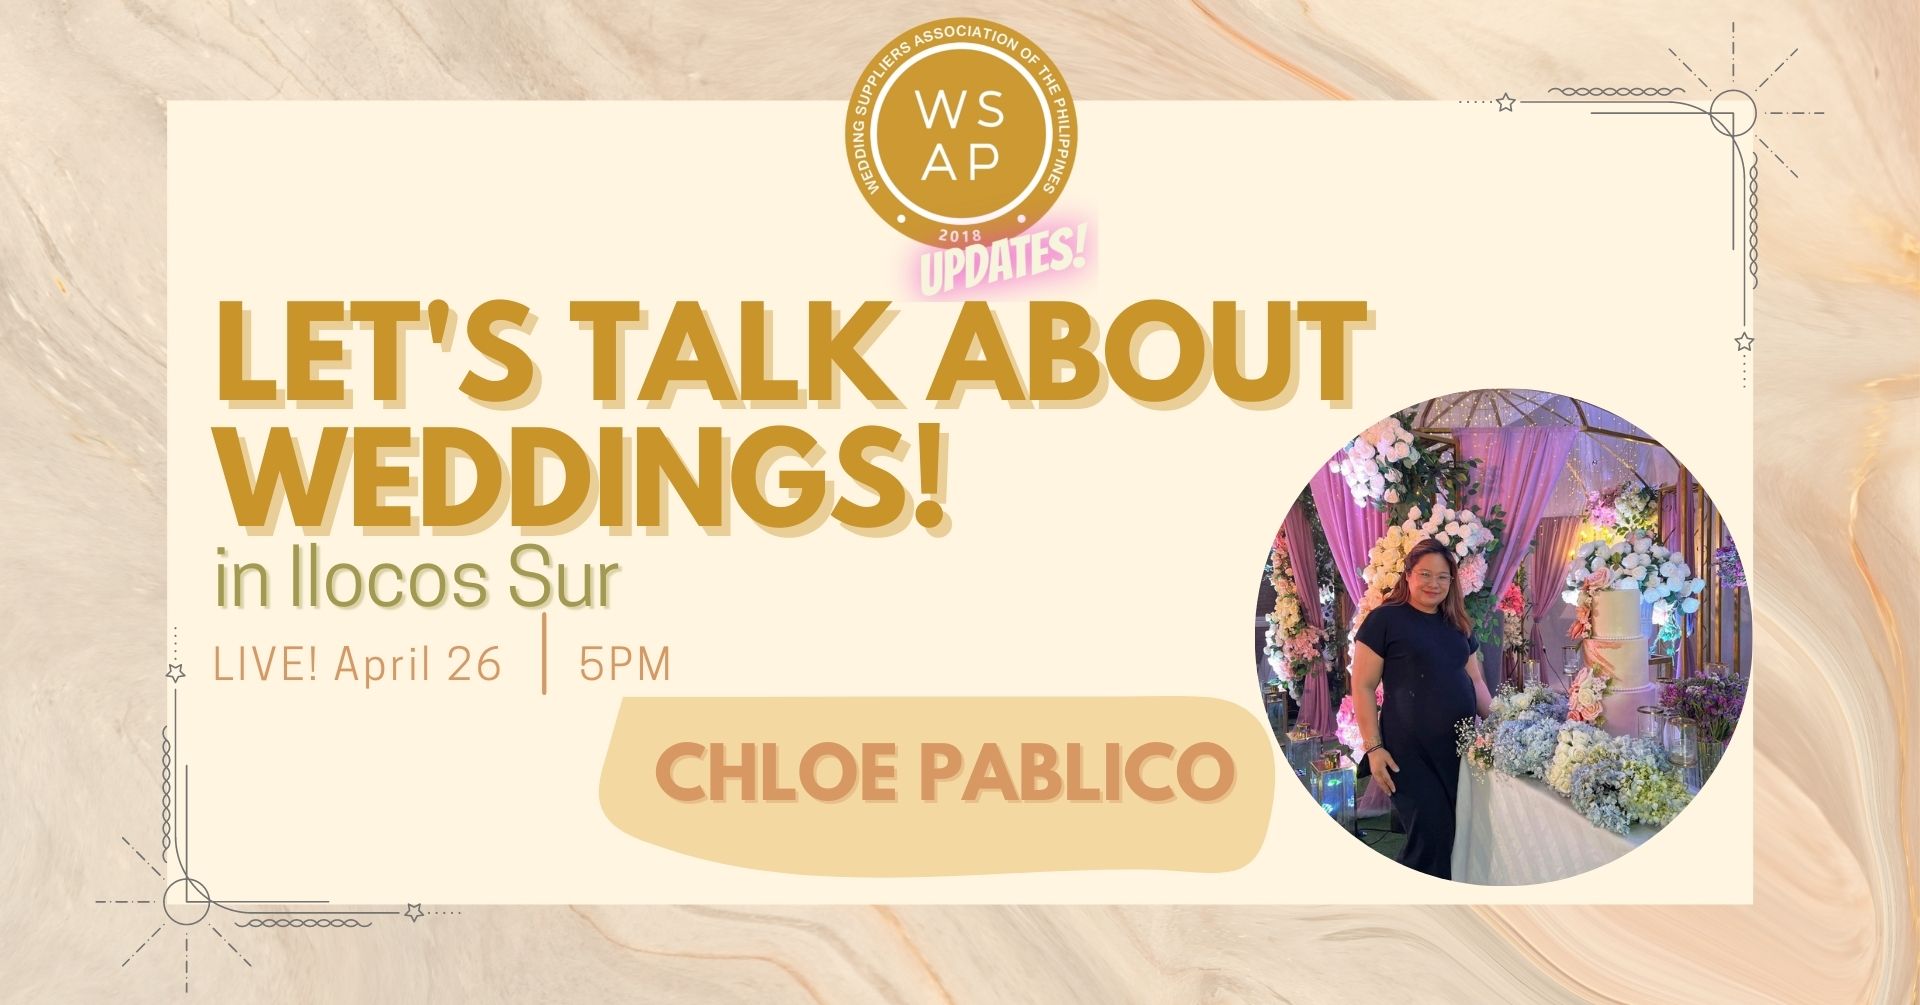 Let's Talk About Weddings in Ilocos Sur with Chloe Pablico